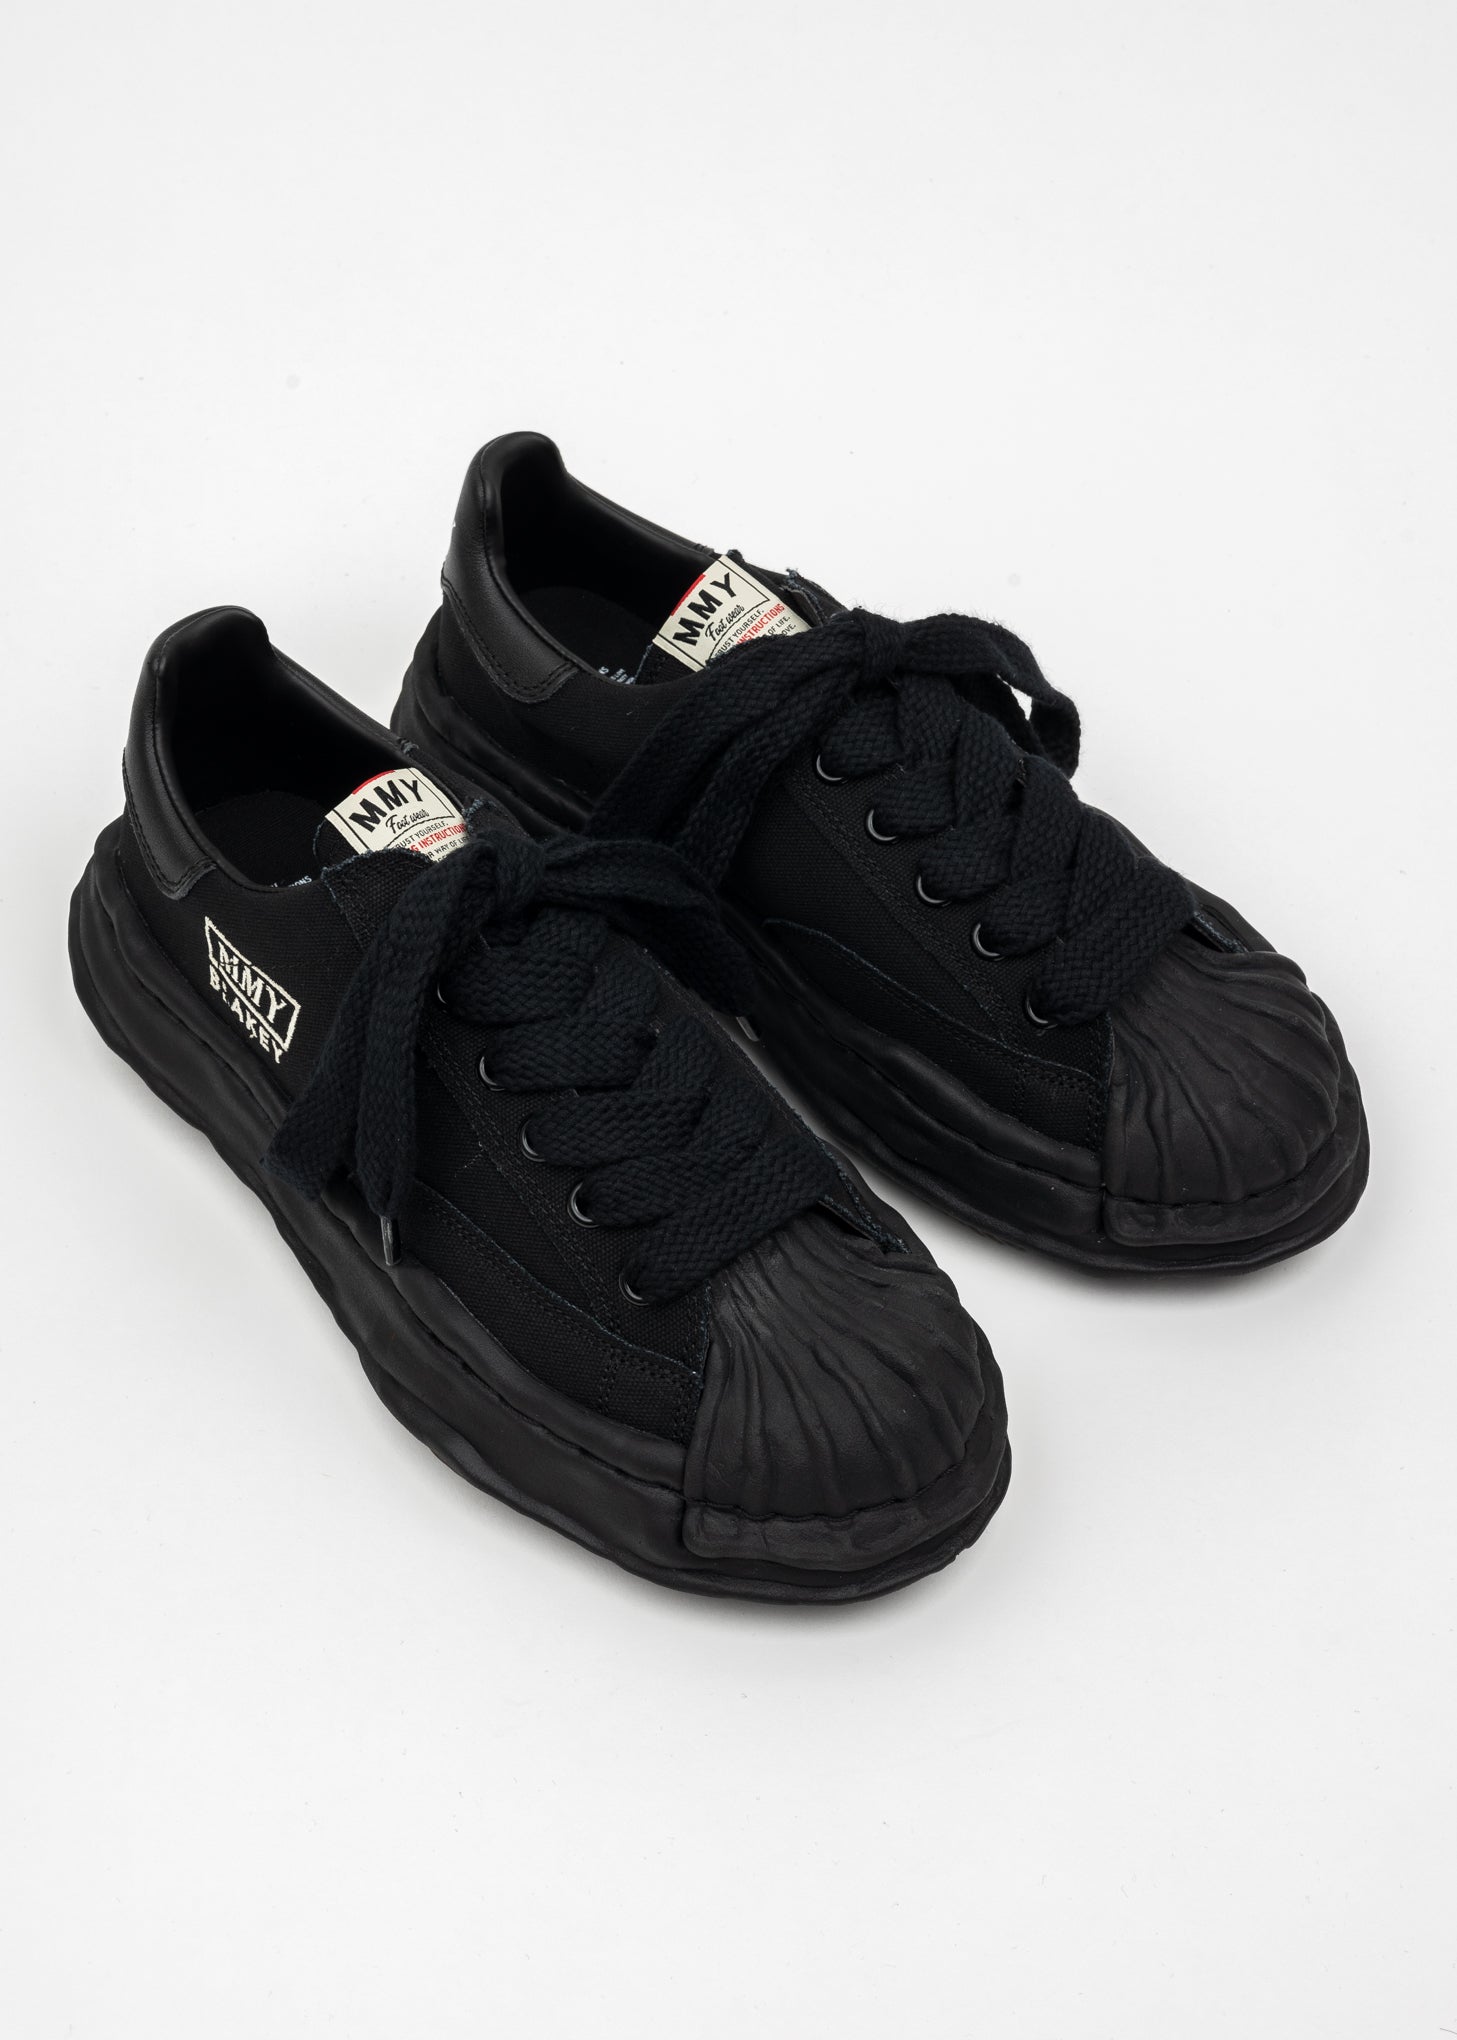 ALL Black OG Sole Canvas Low-Top Sneaker (BLAKEY LOW)